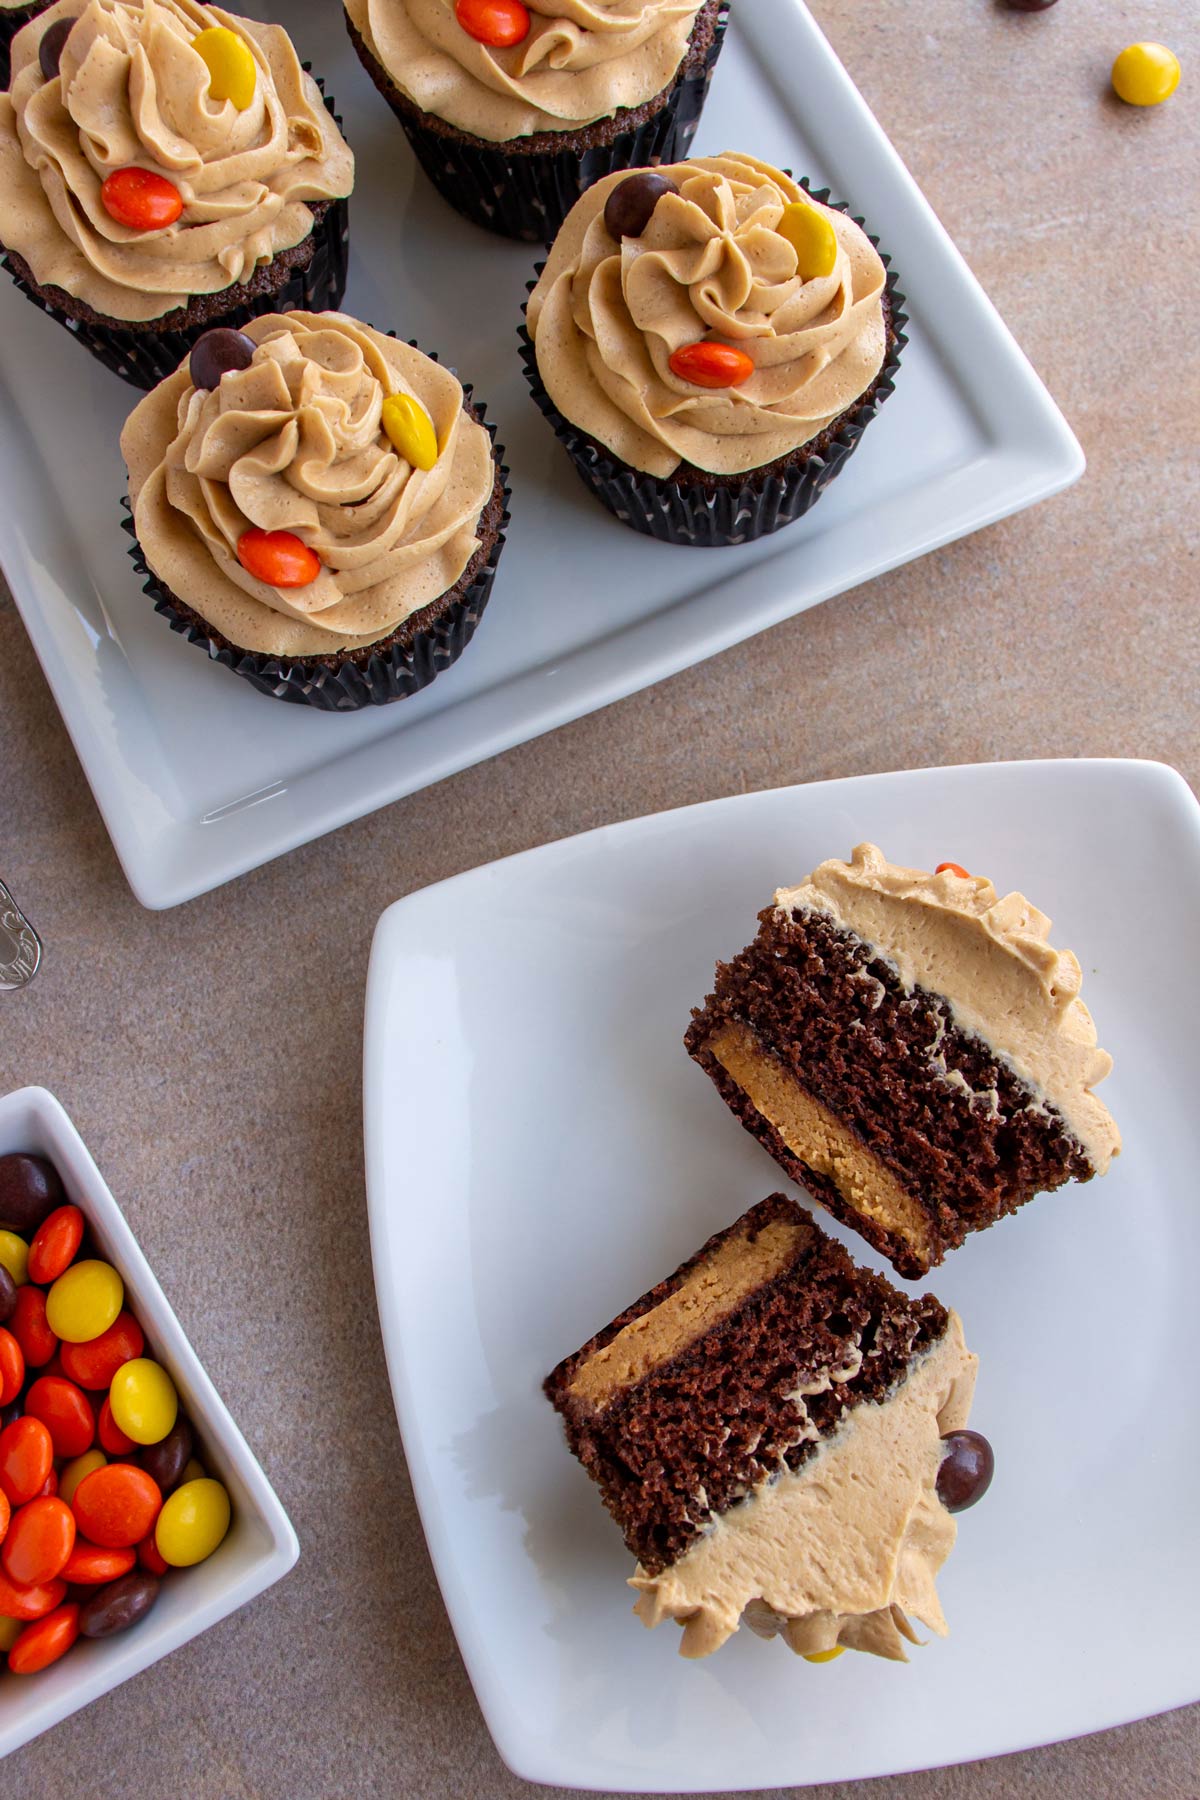 A halved chocolate cupcake on a white plate to show the peanut butter cup inside.